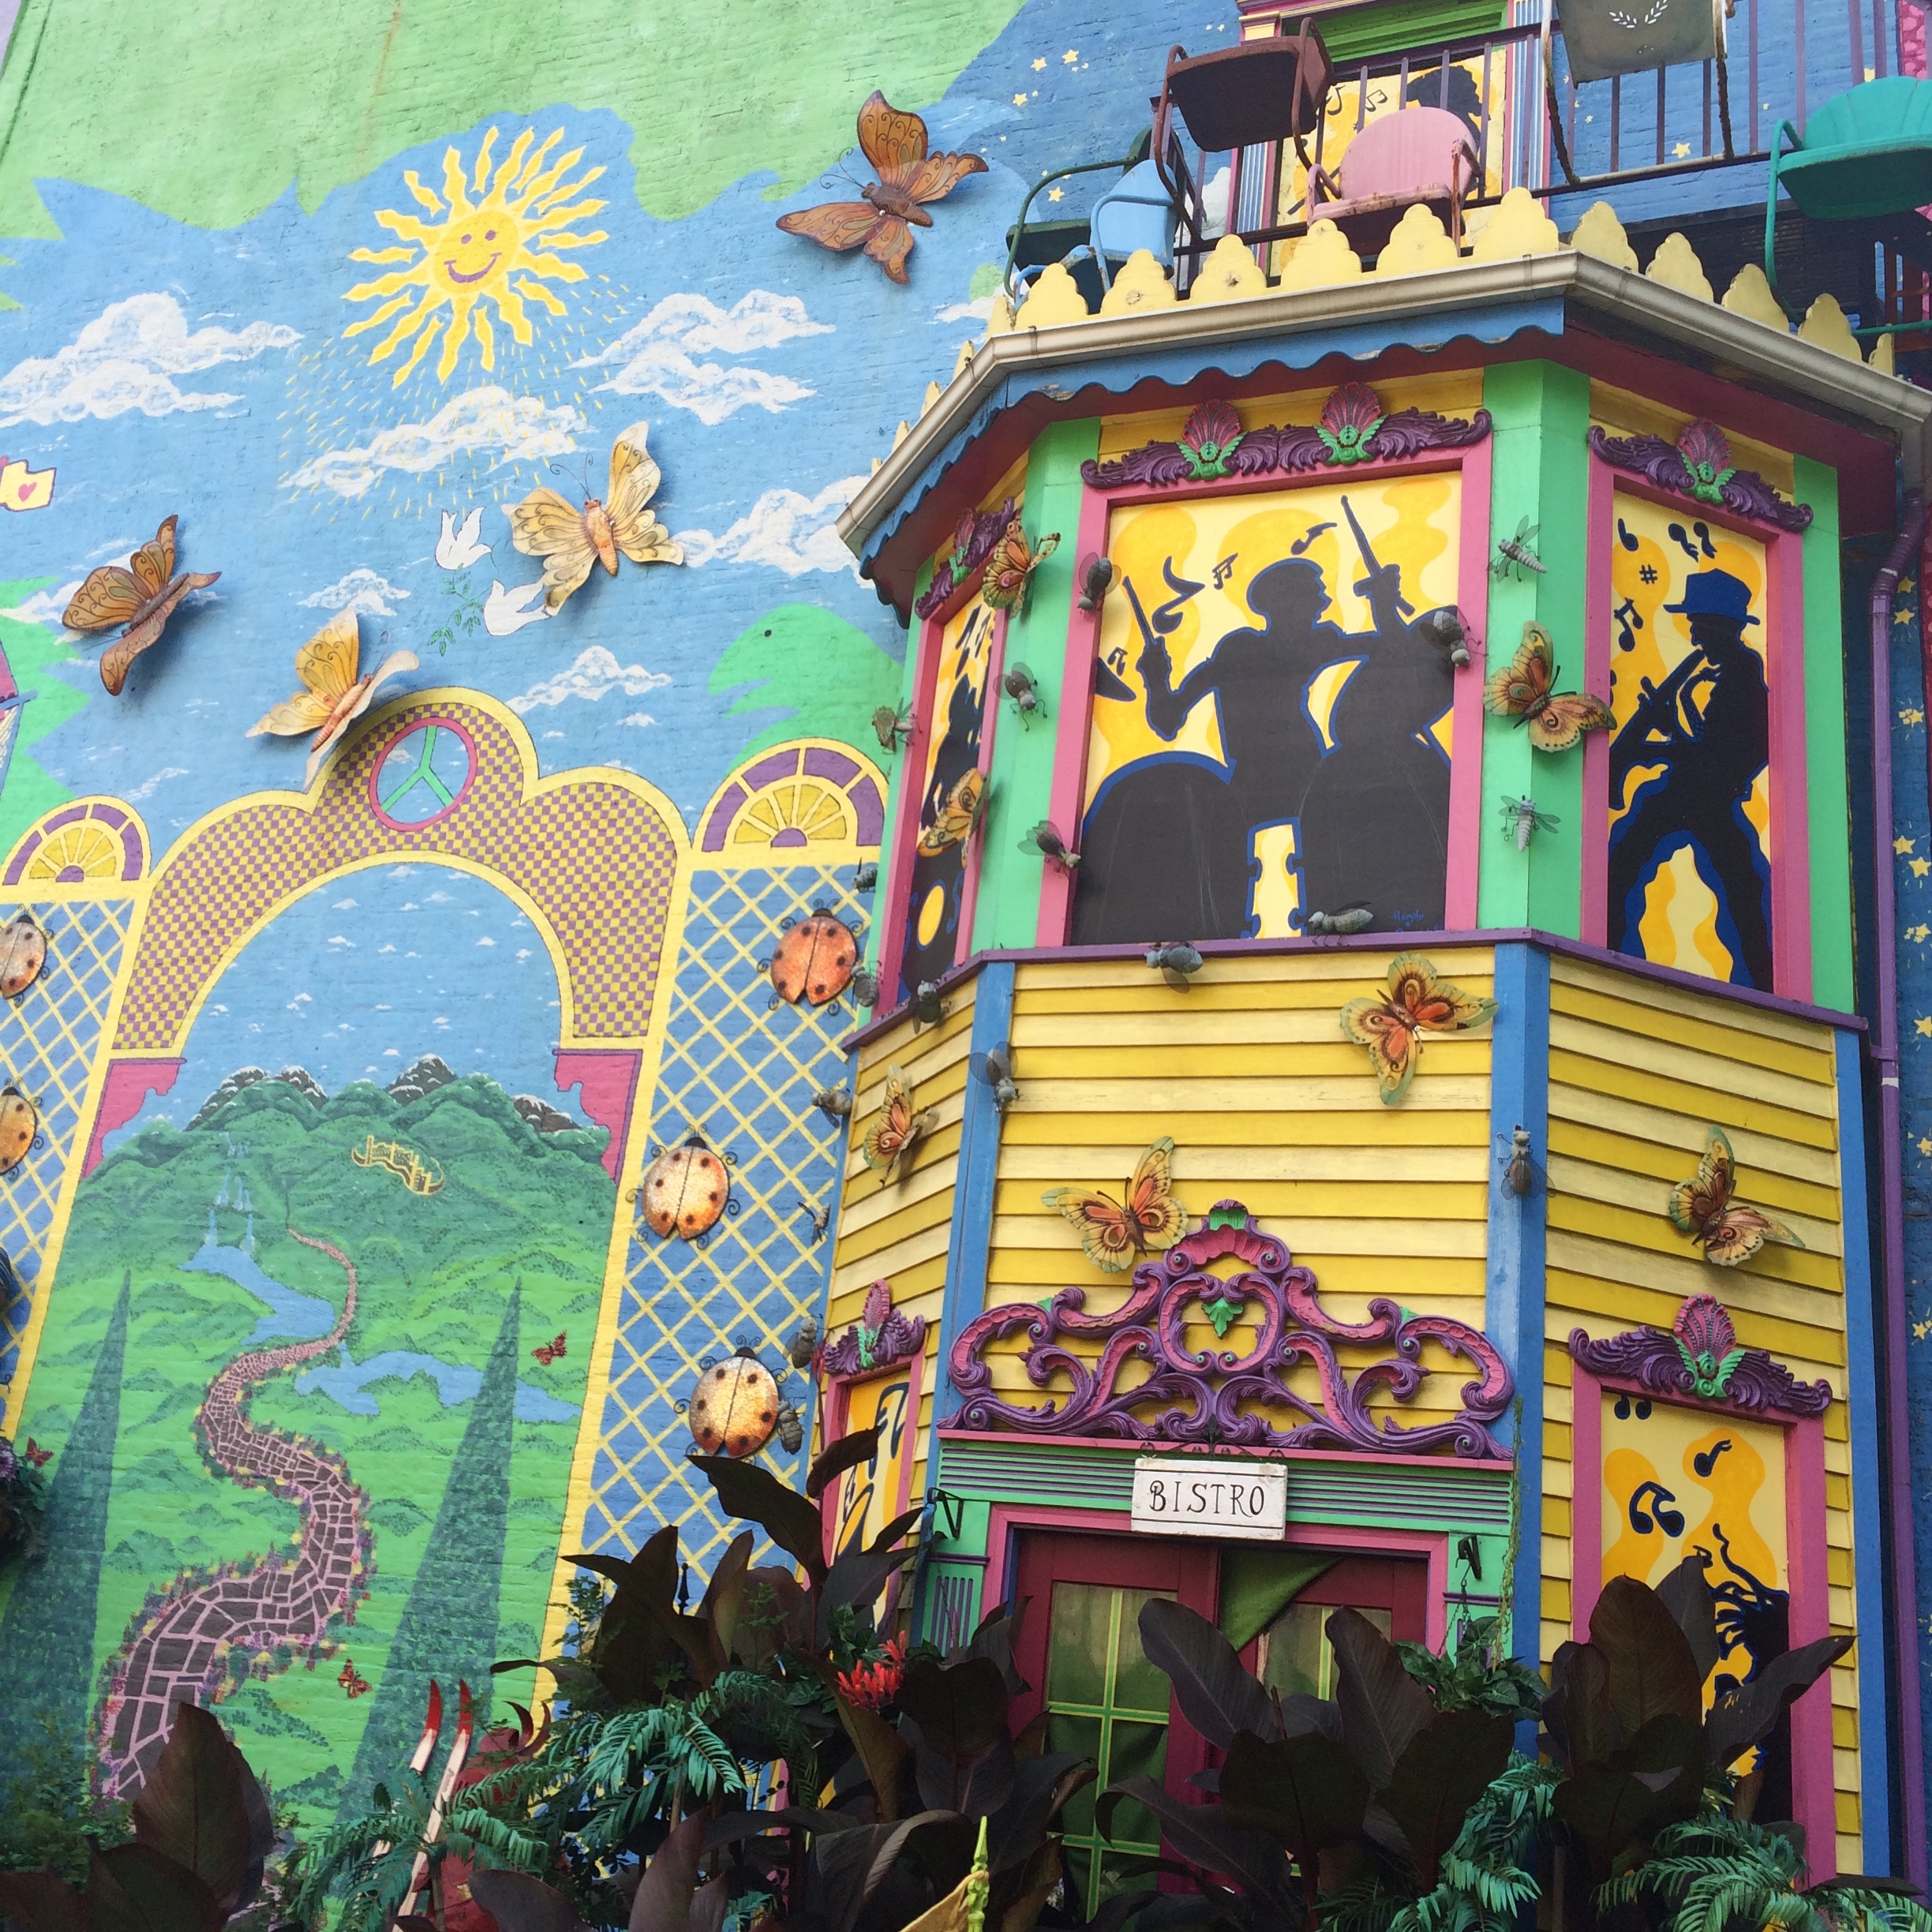 Free Things to do in Pittsburgh, PA - Randyland Art Gallery